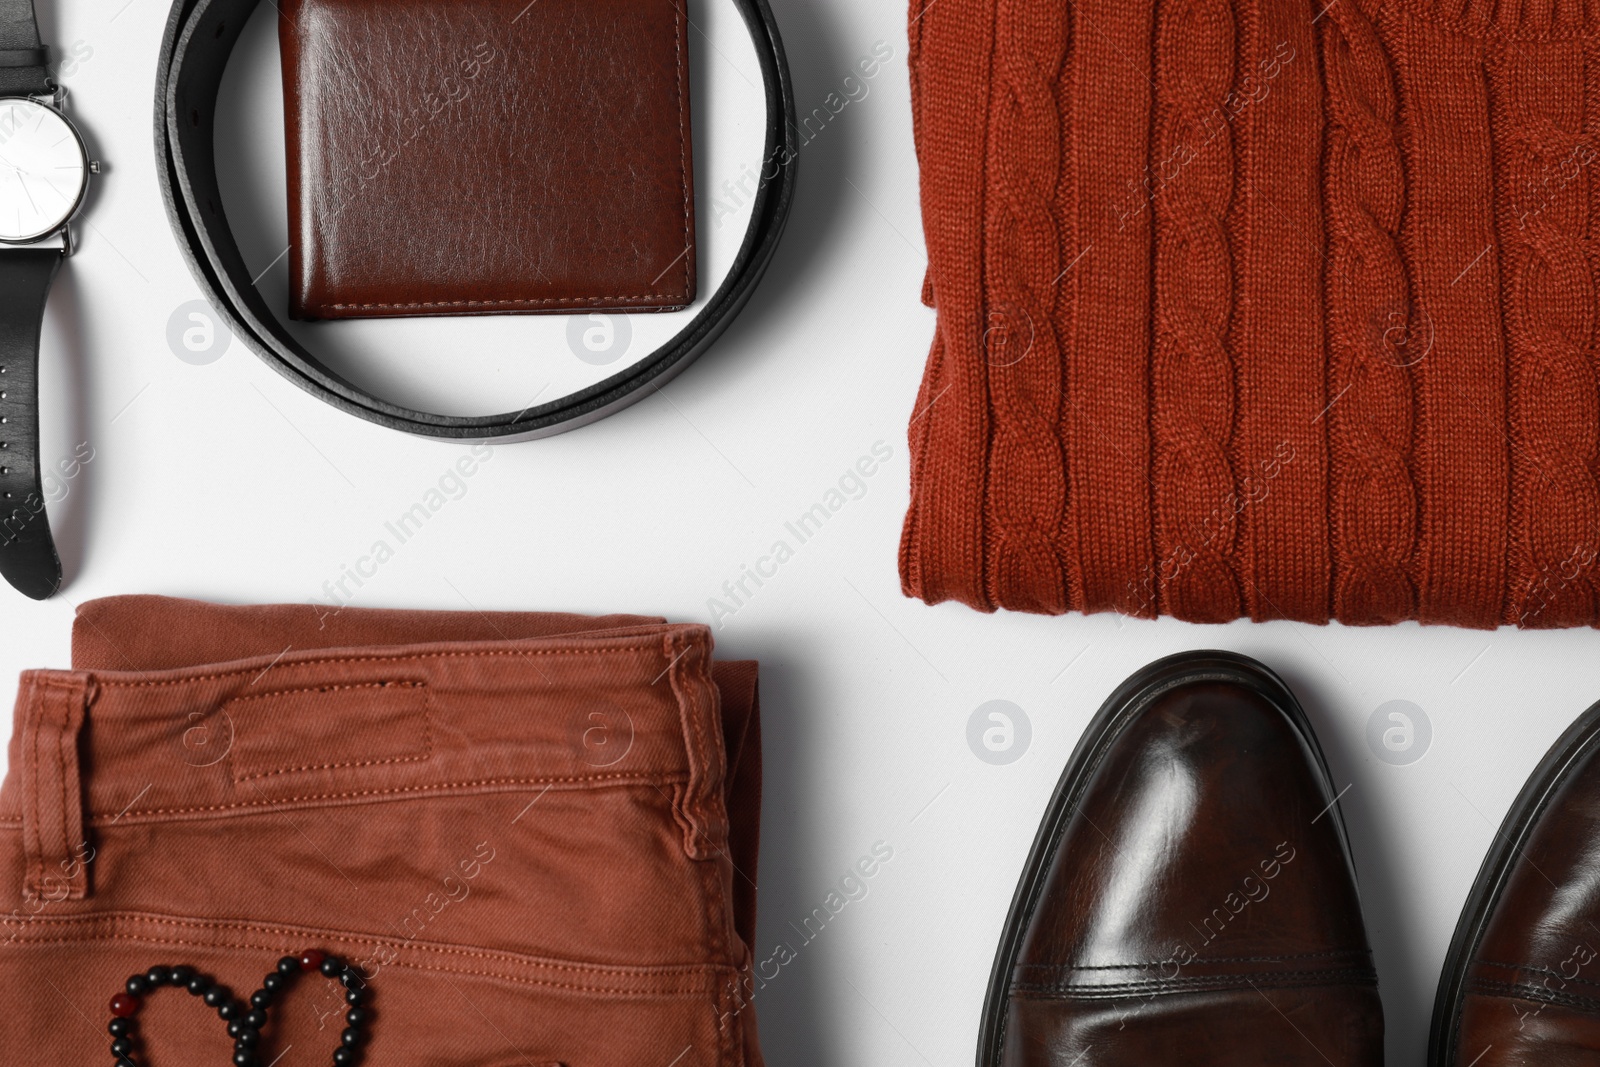 Photo of Stylish male autumn outfit and accessories on white background, flat lay. Trendy warm clothes